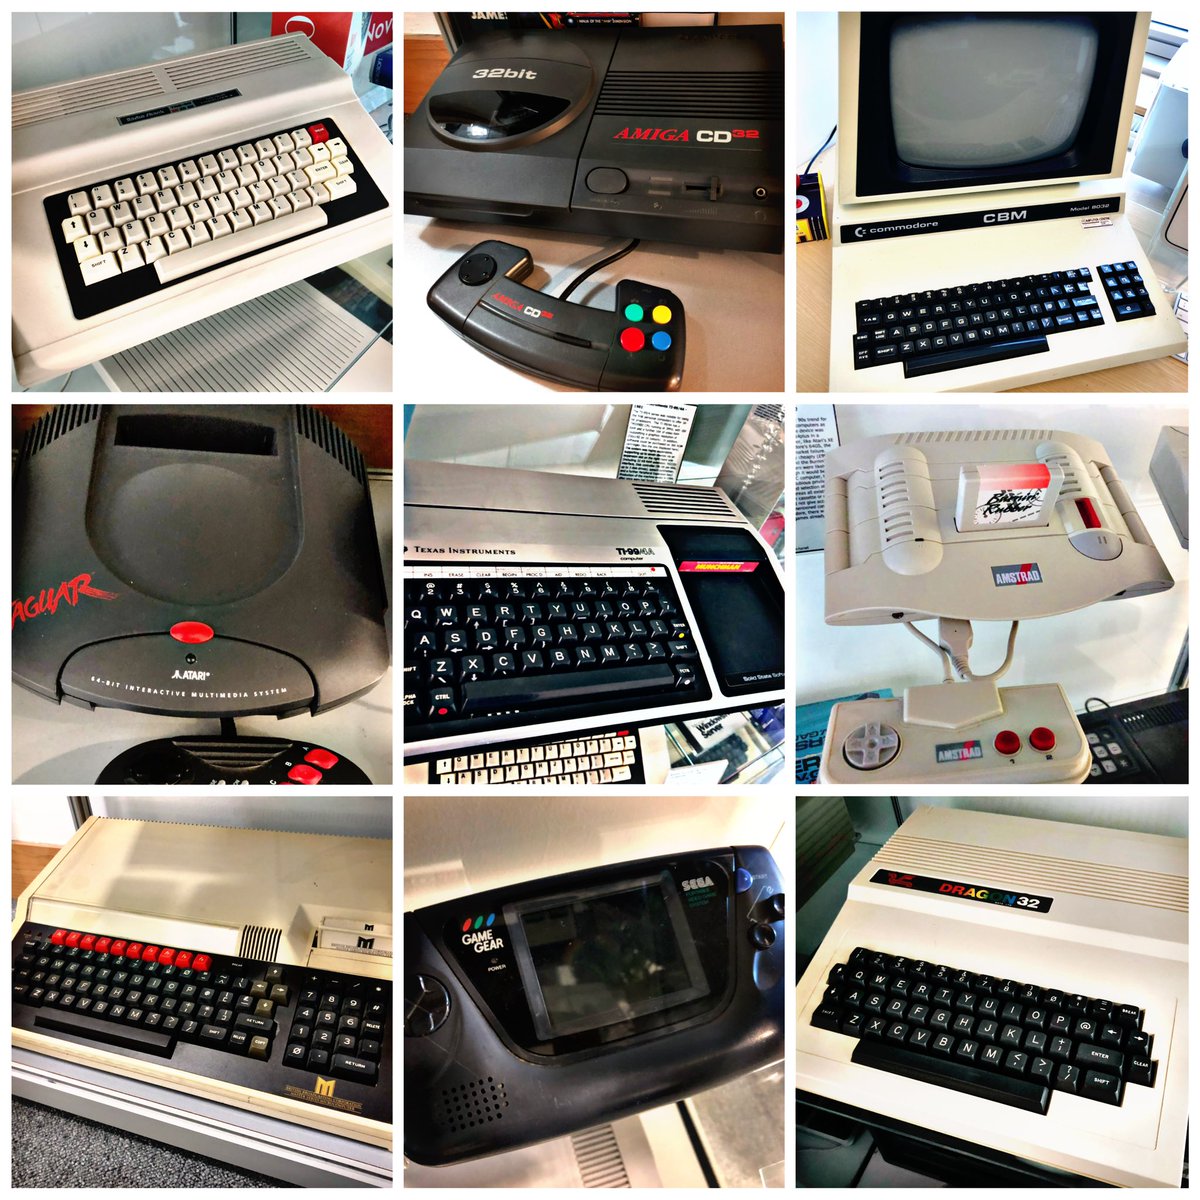 This week’s #RetroEnnead offers you the #CoCo2, #CD32, #CBM8032, #Jaguar, #TI994A, #GX4000, #Master128, #GameGear and #Dragon32. Select a line of 3 and eject the rest! #RetroComputing #ComputerHistory #RetroGaming #VideoGames